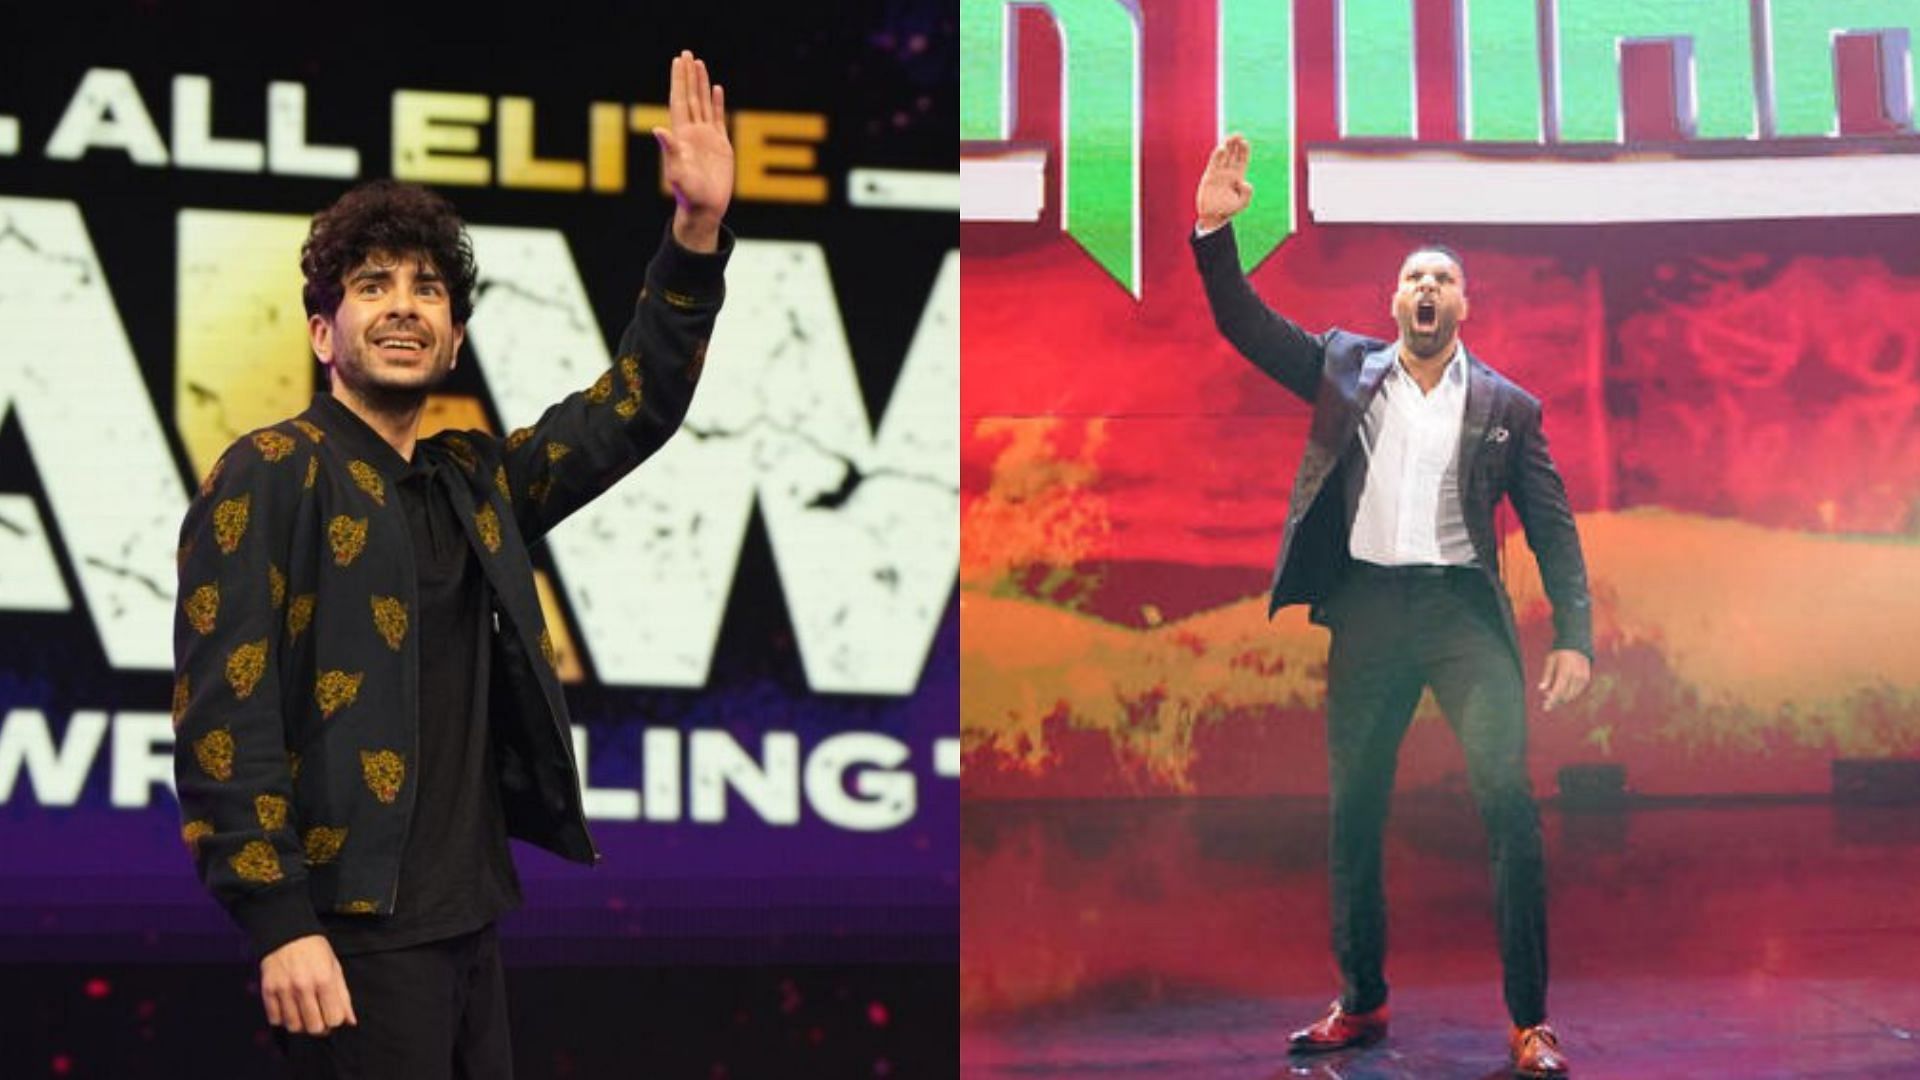 Tony Khan (left) is the president of All Elite Wrestling and Jinder Mahal (right) is a former WWE Champion